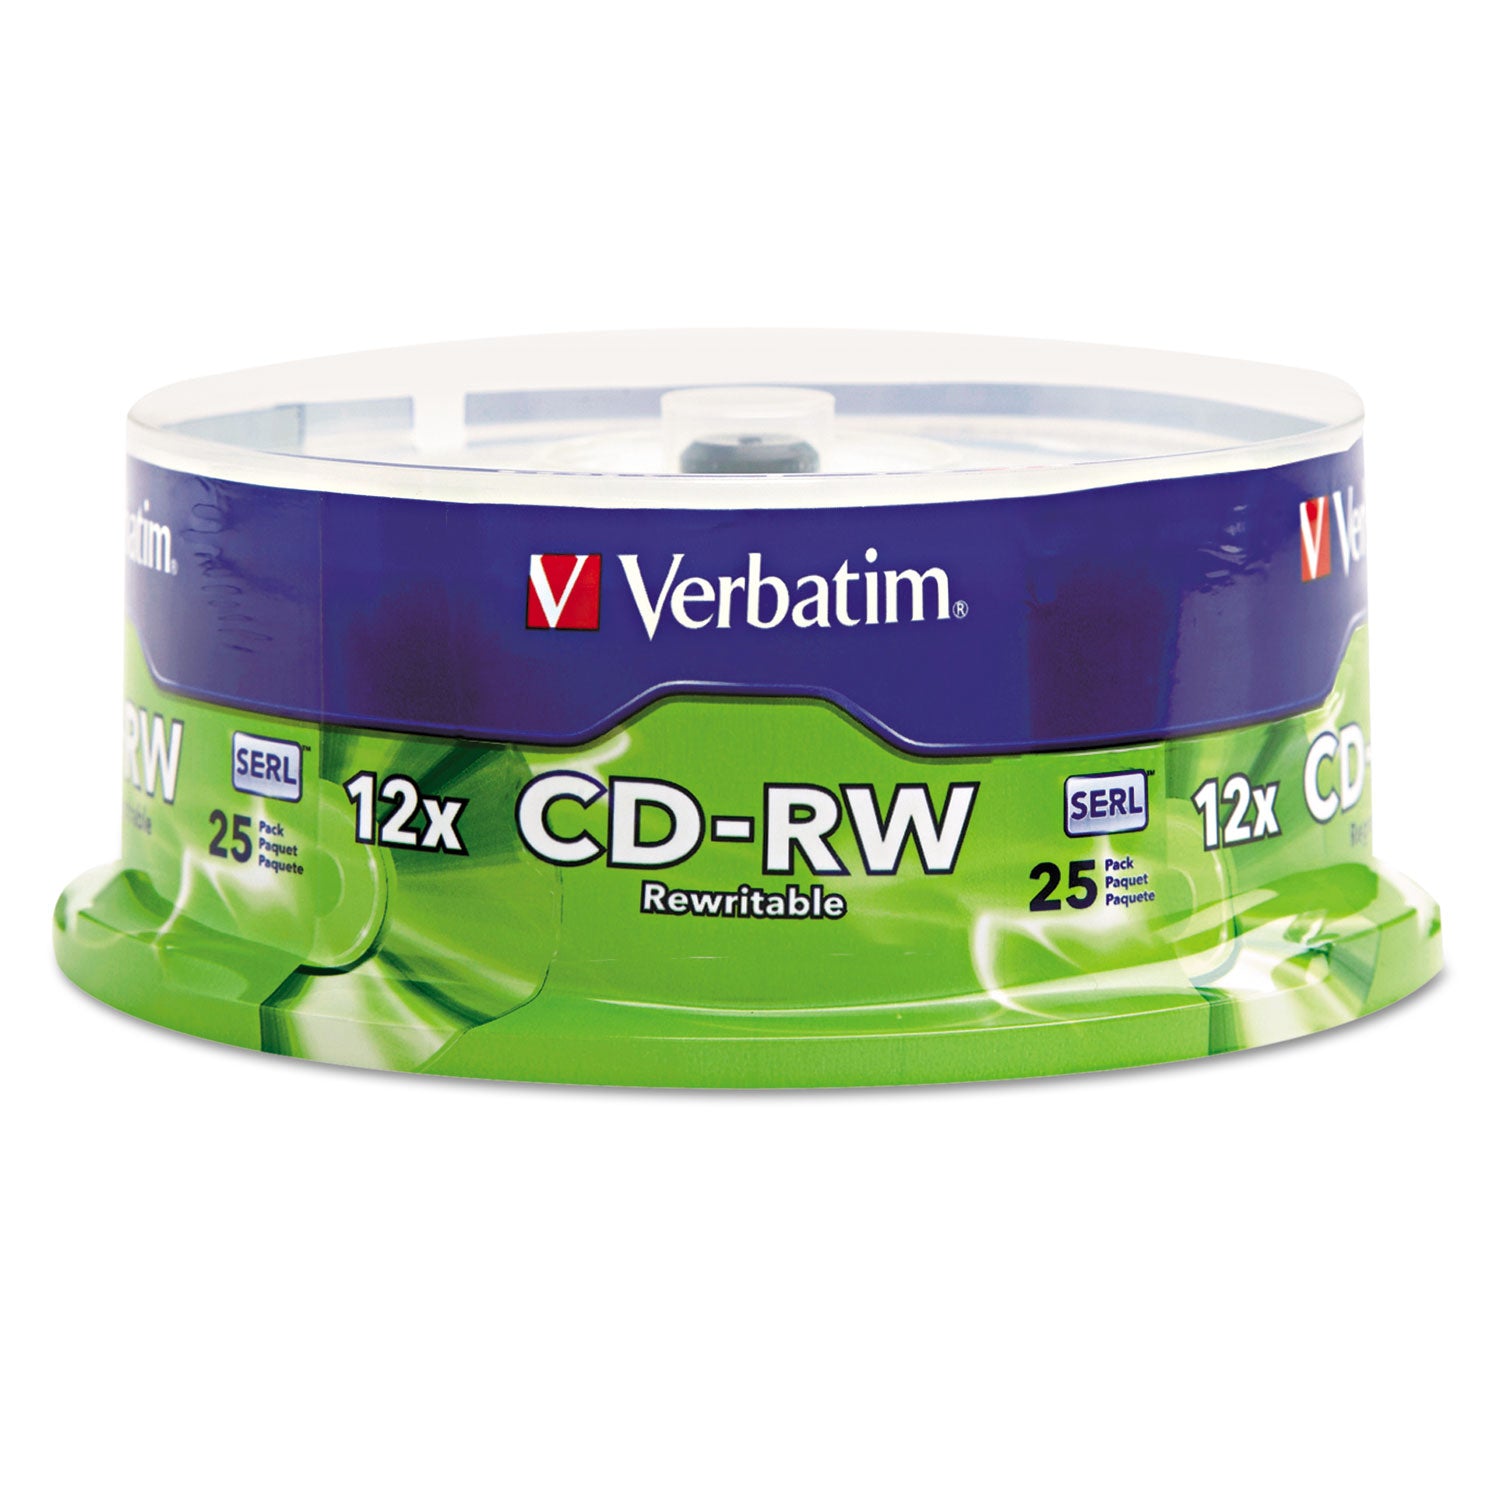 CD-RW Rewritable Disc, 700 MB/80 min, 12x, Spindle, Silver, 25/Pack - 